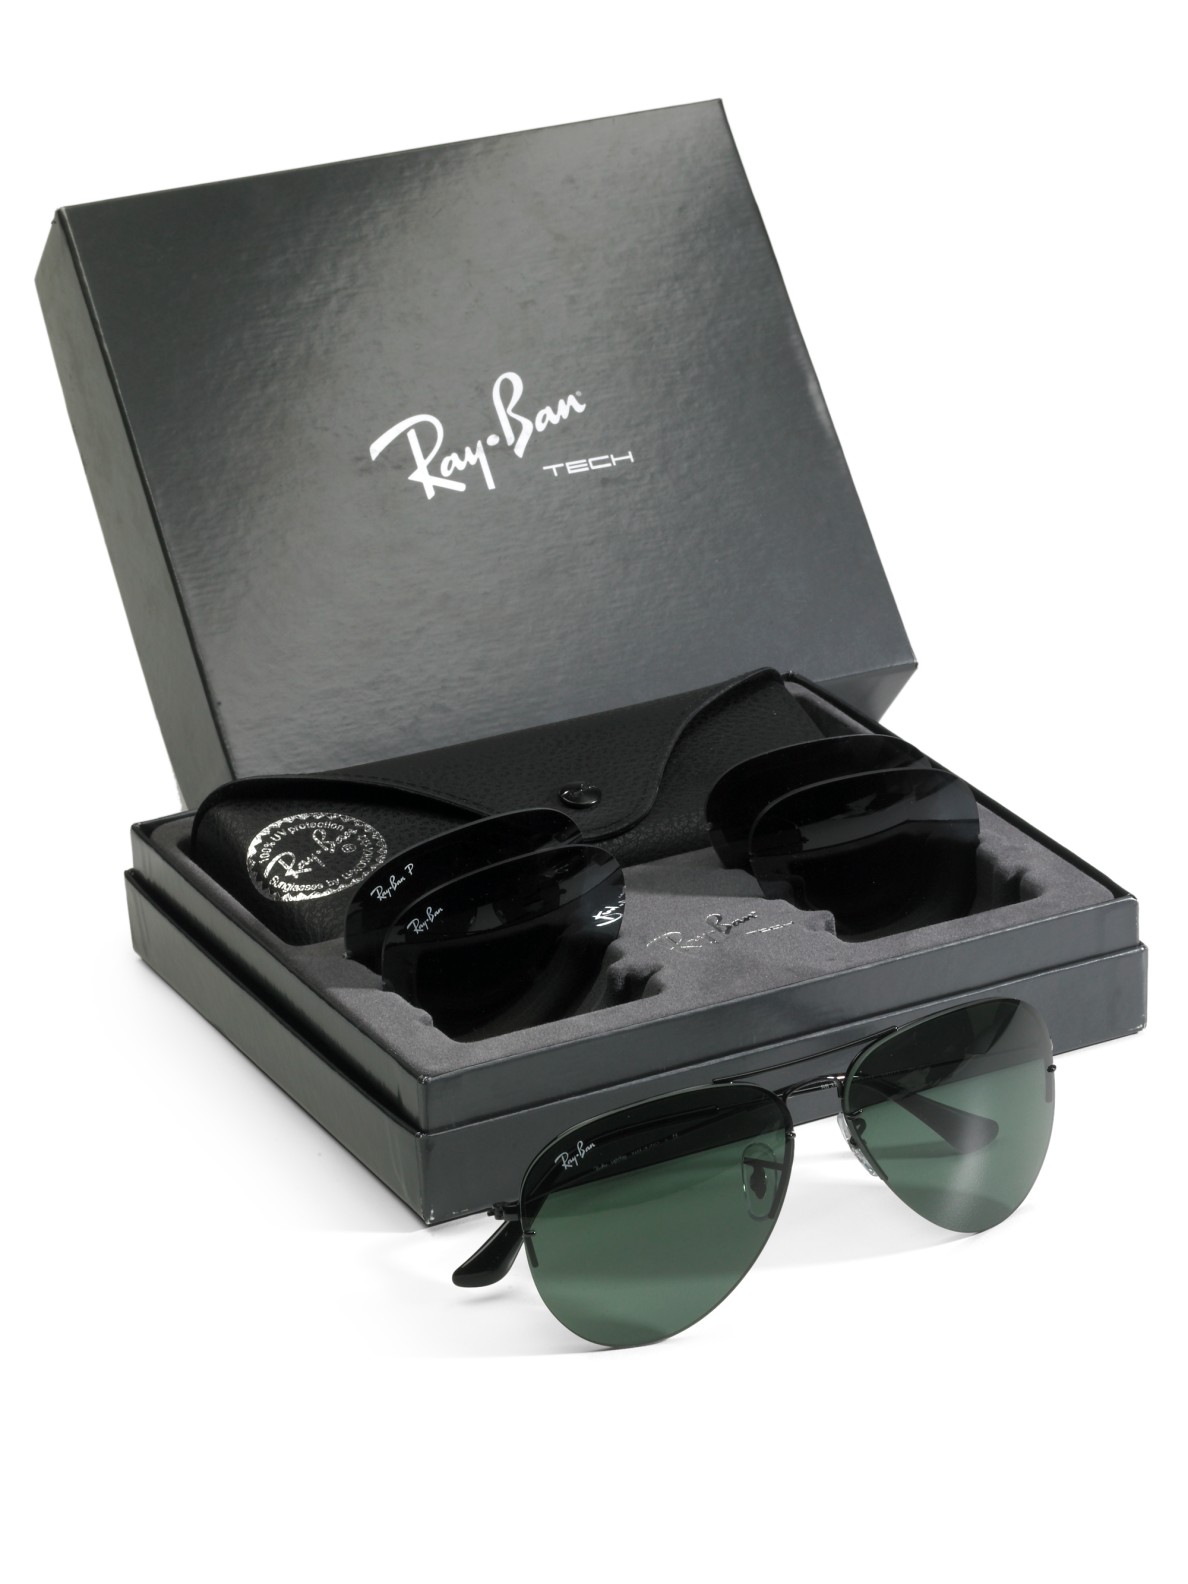 ray ban swappable sunglasses